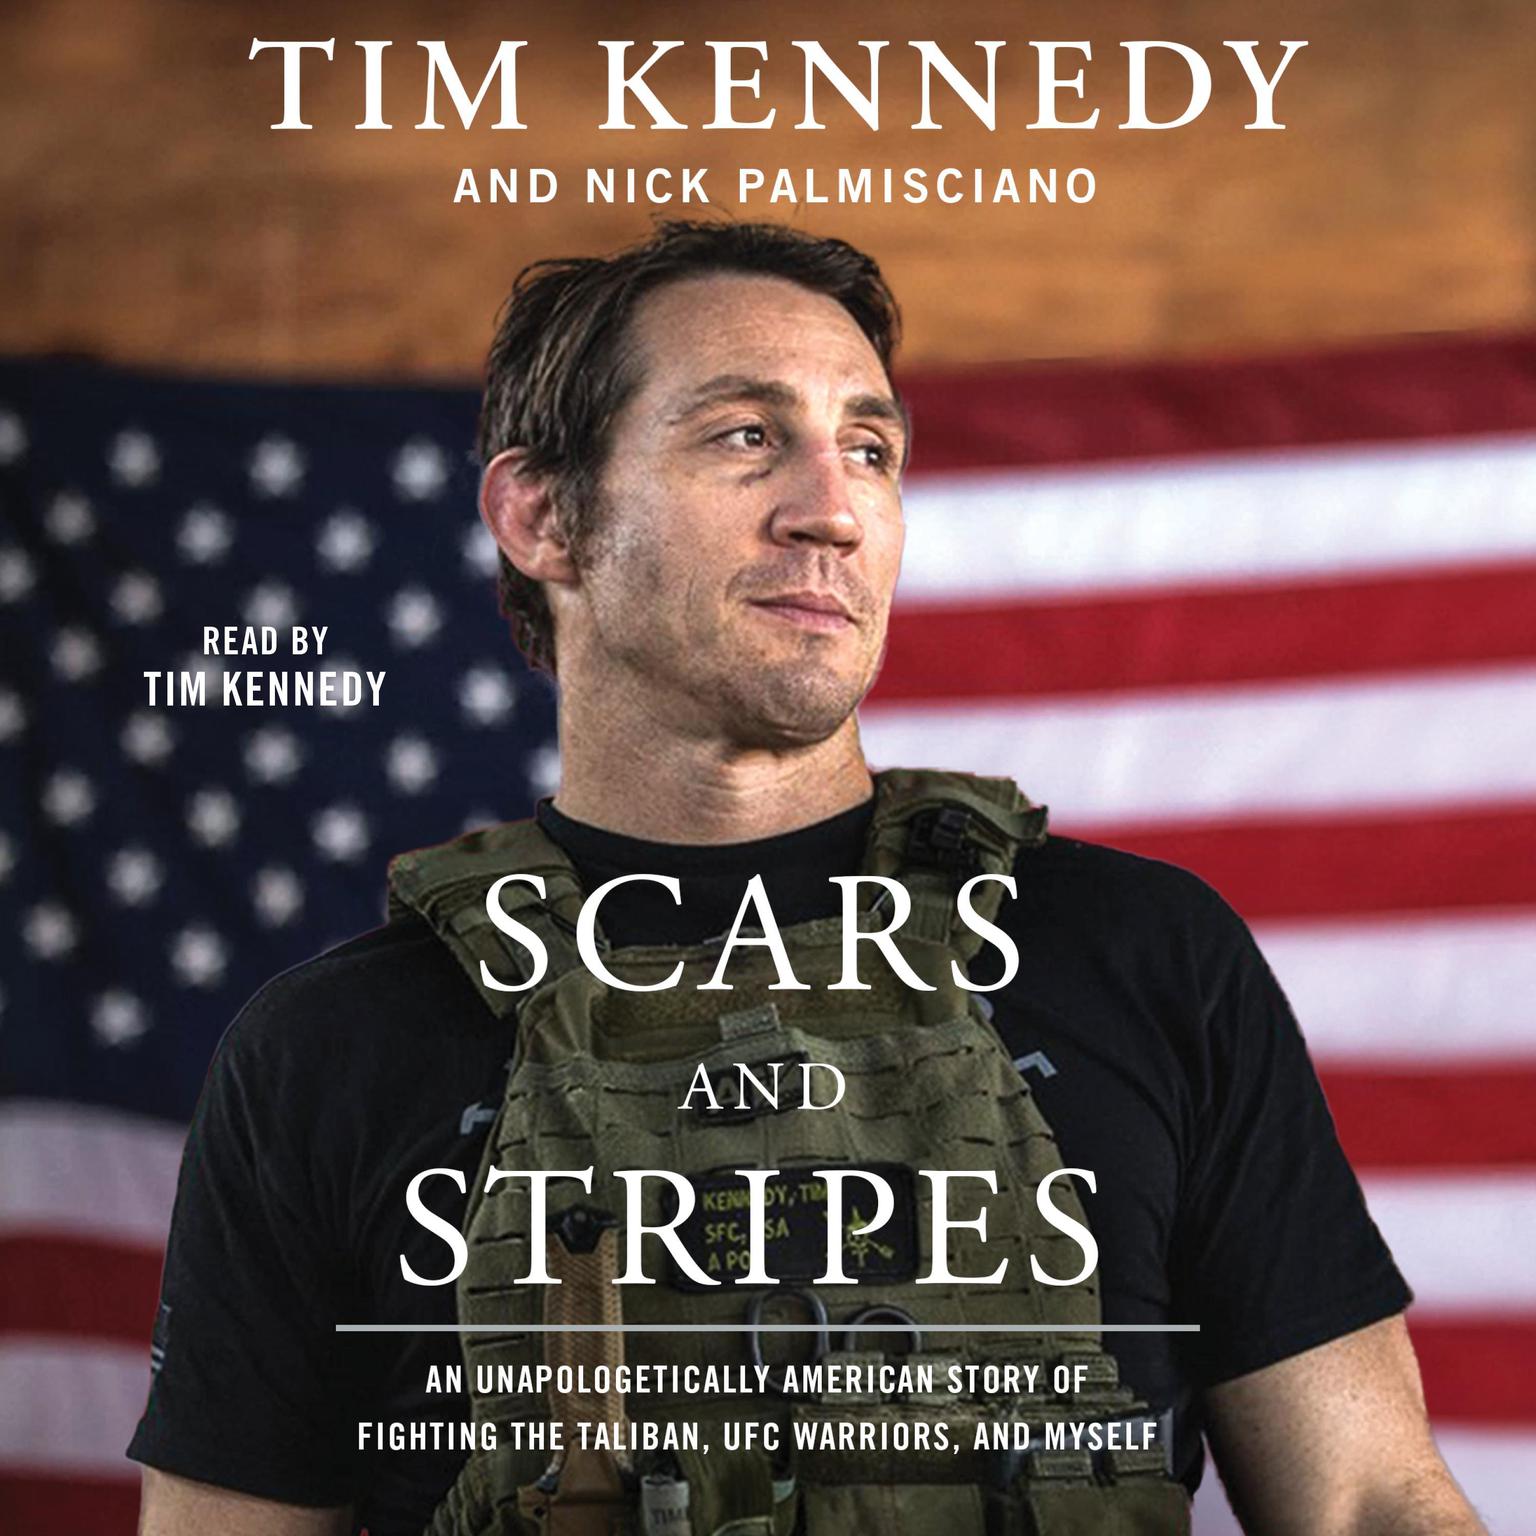 Scars and Stripes: An Unapologetically American Story of Fighting the Taliban, UFC Warriors, and Myself Audiobook, by Nick Palmisciano